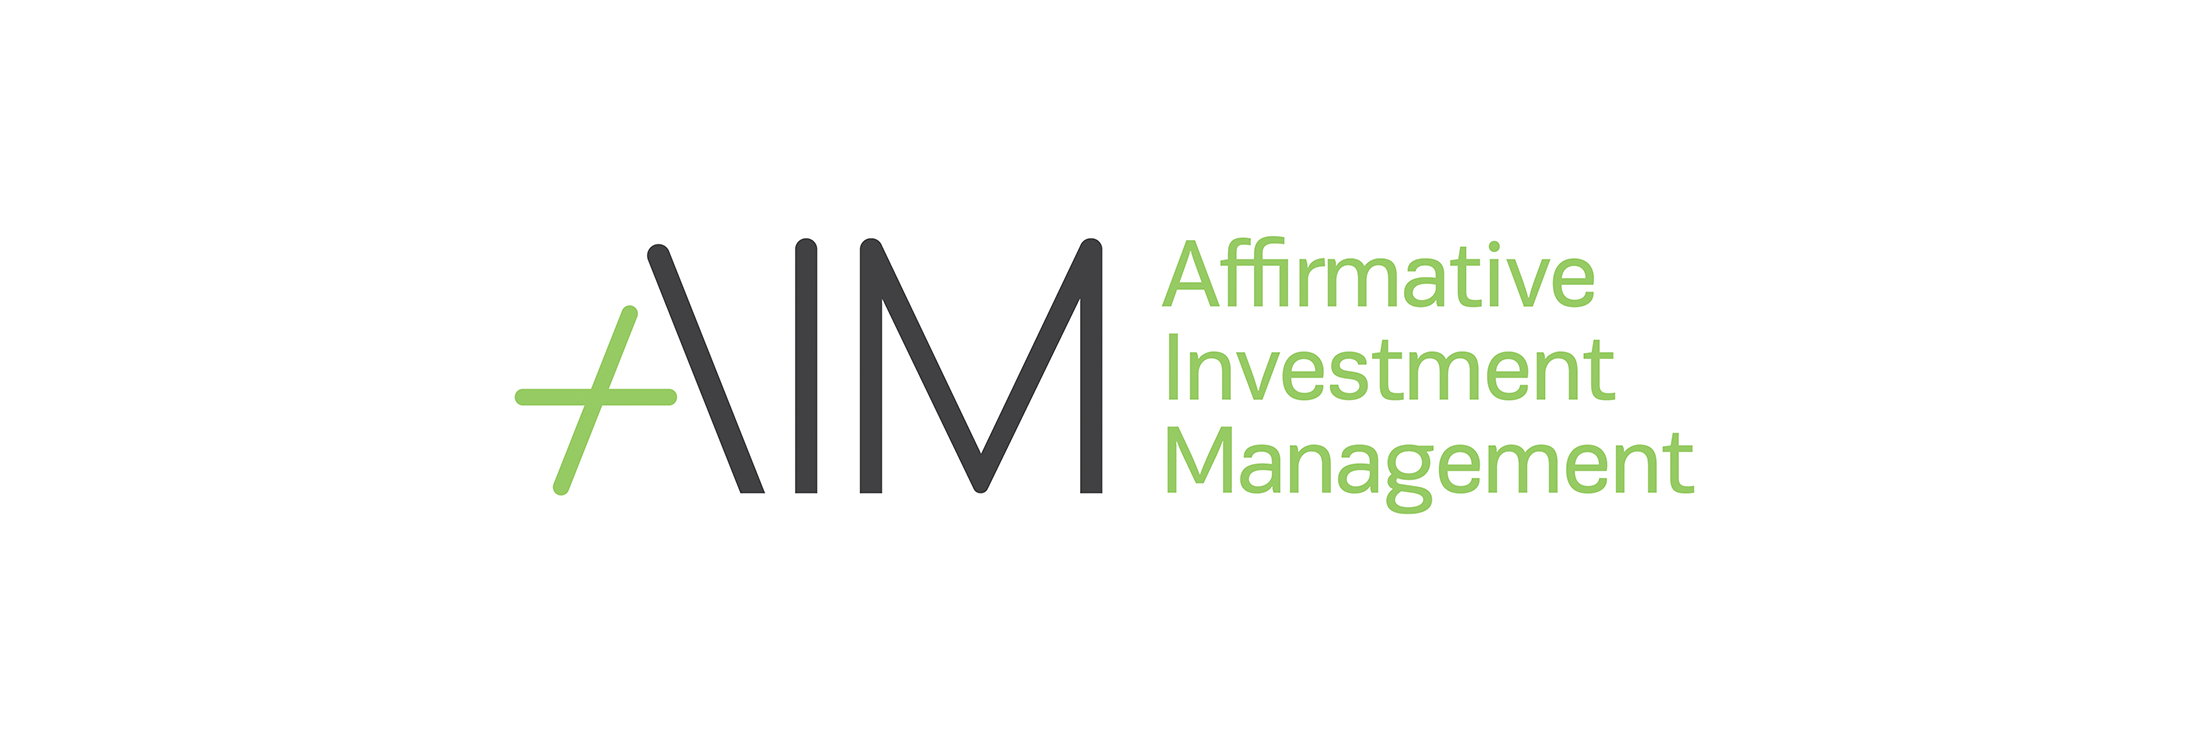 AIM wins at the 2022 ESG investing Awards